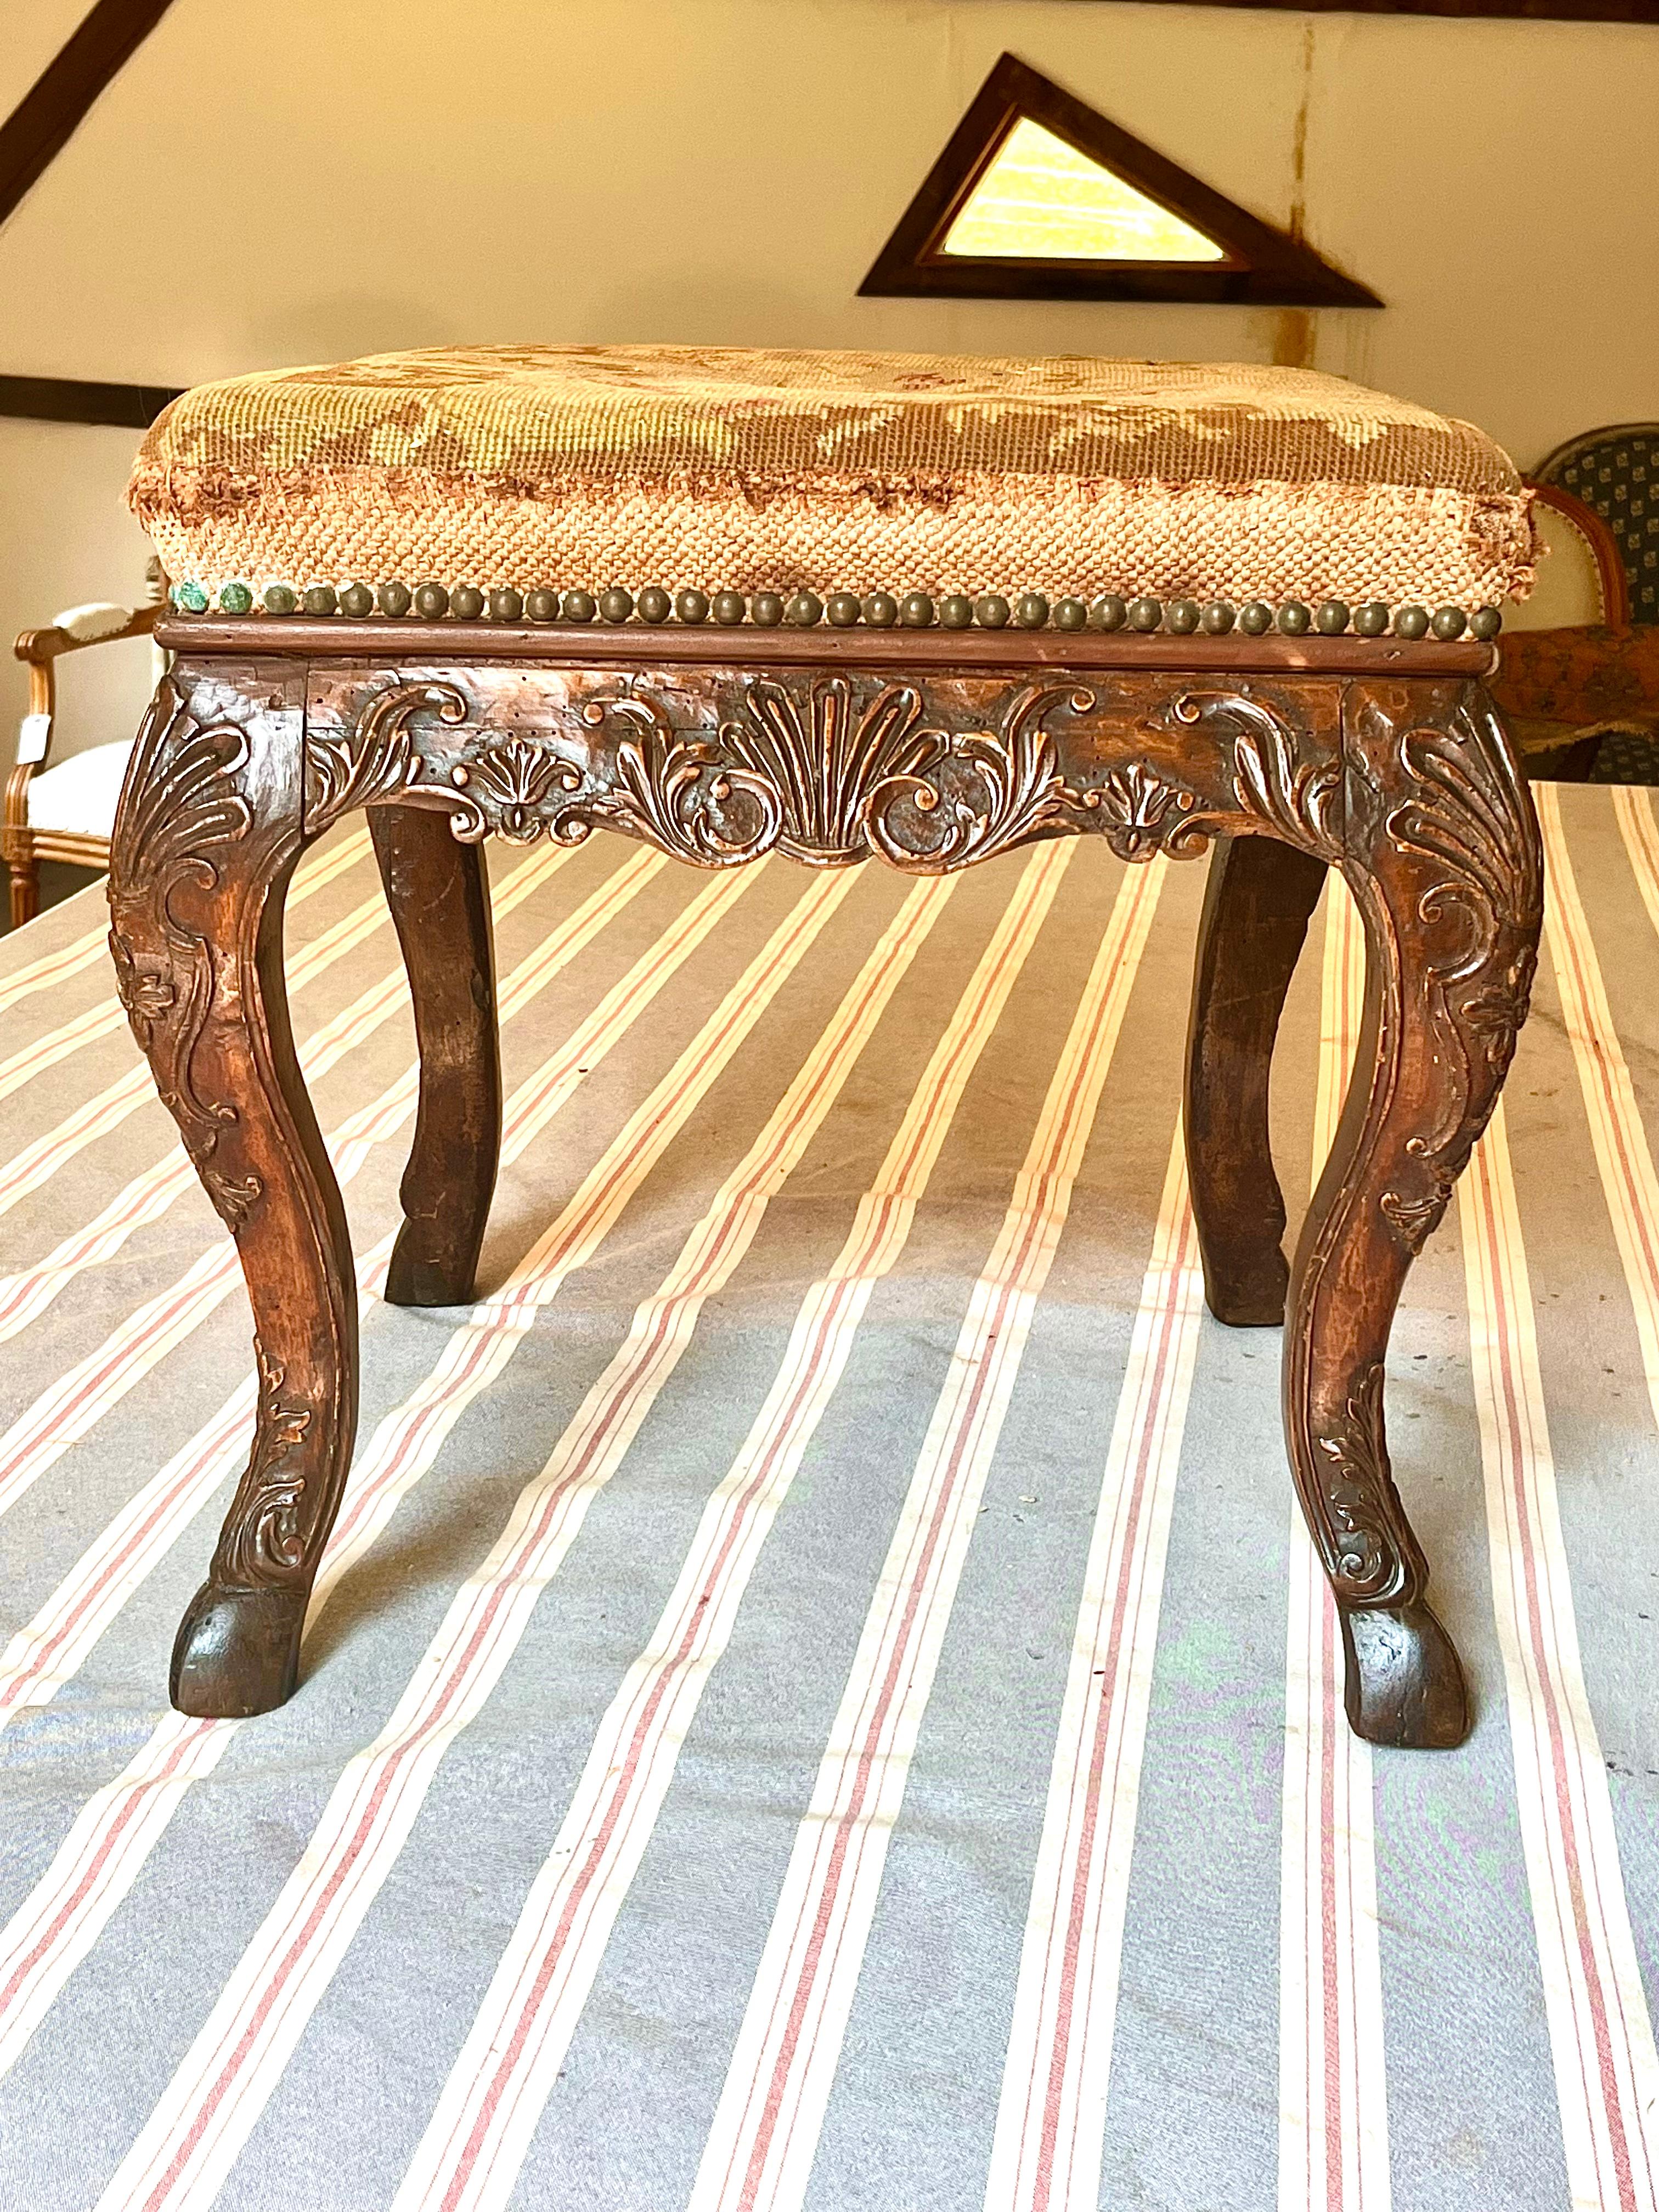 An early Louis XV period tabouret (stool) in walnut, elaborately carved on all four sides with garlands, acanthus leaves, scrolls and other decoration, the scalloped apron supported by cabriole legs, all on carved “pied de biche” (doe’s feet). The